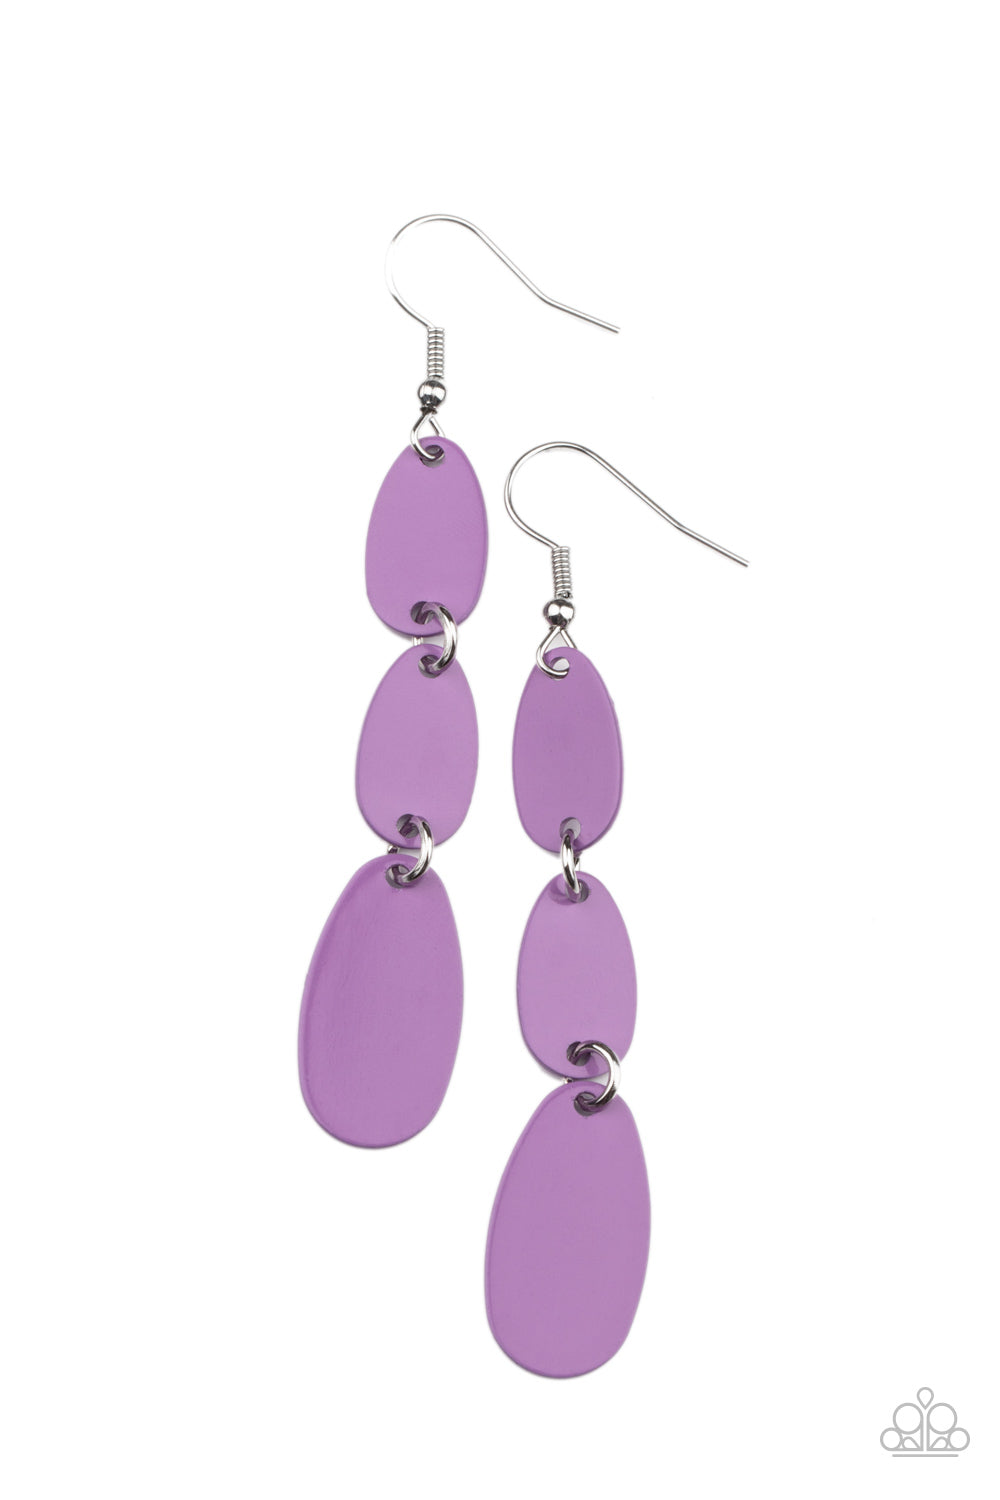 Painted in a shiny Amethyst Orchid finish, lengthened oval frames drip from the ear, linking into a colorful lure. Earring attaches to a standard fishhook fitting.  Sold as one pair of earrings by Paparazzi. 